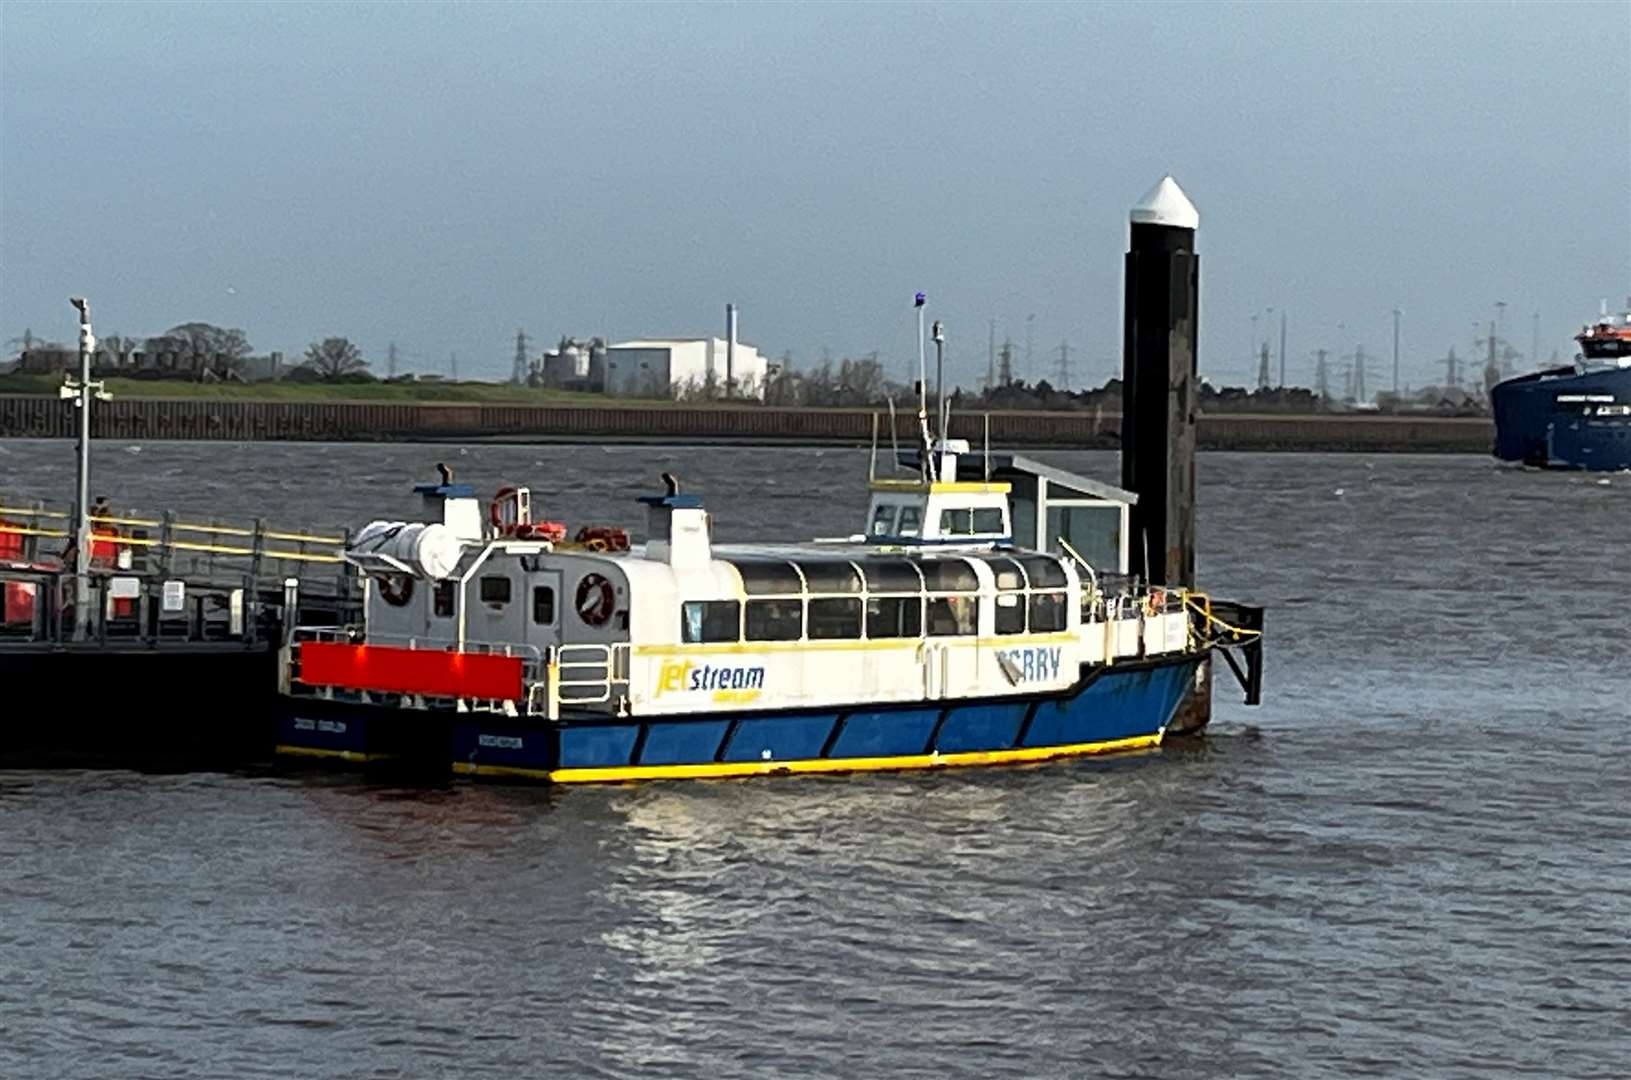 The Tilbury Ferry services are set to be axed in March